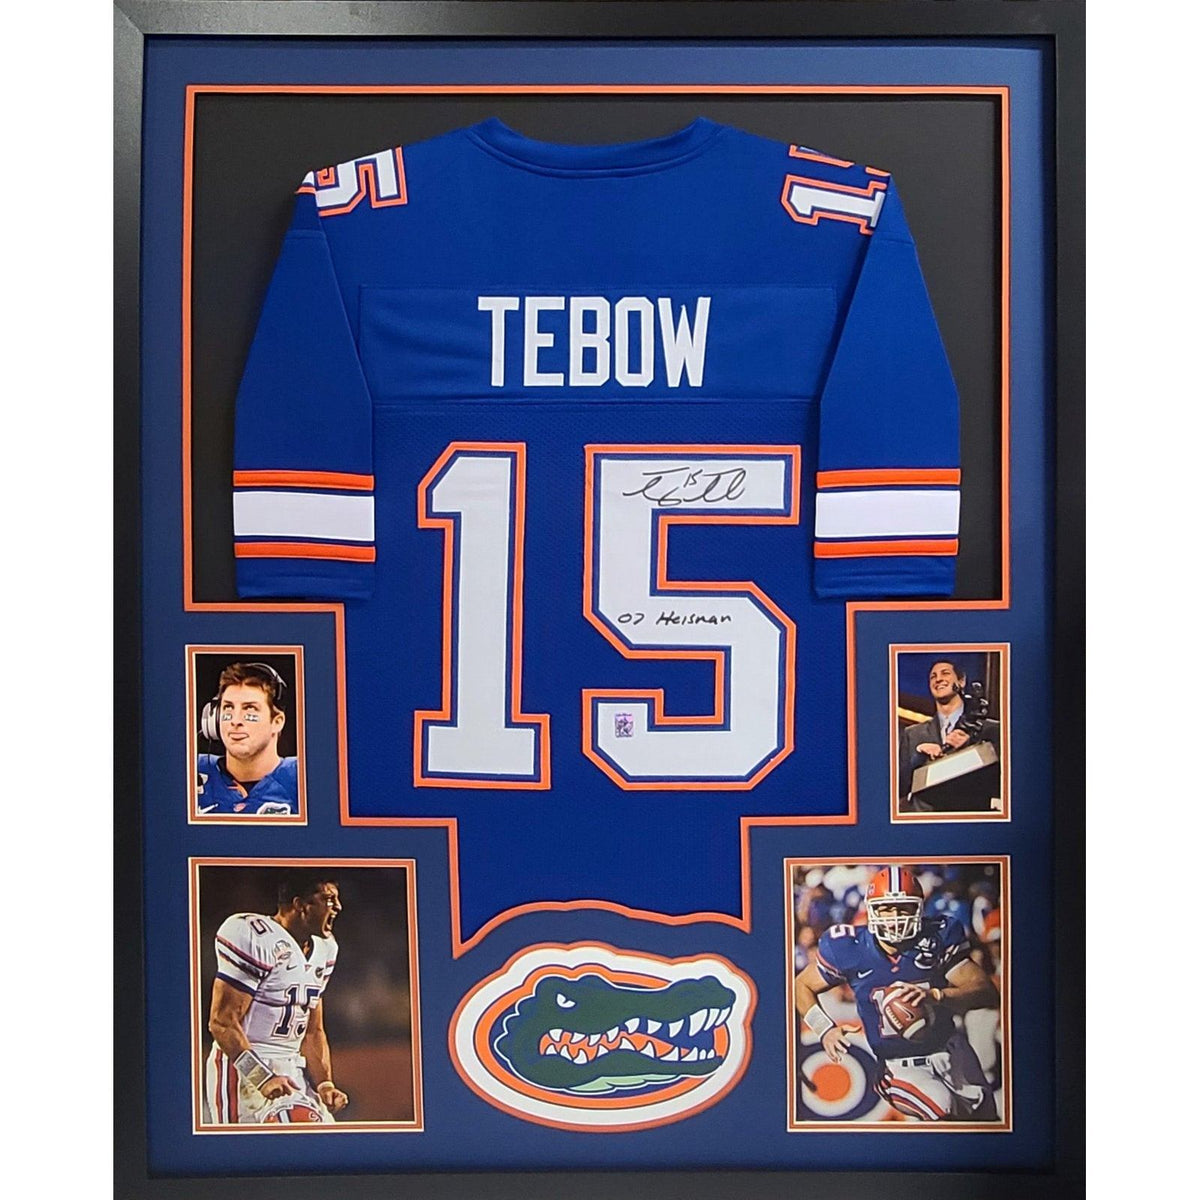 Tim Tebow Framed Jersey Autographed Signed Florida Gators Tebow Authenticated